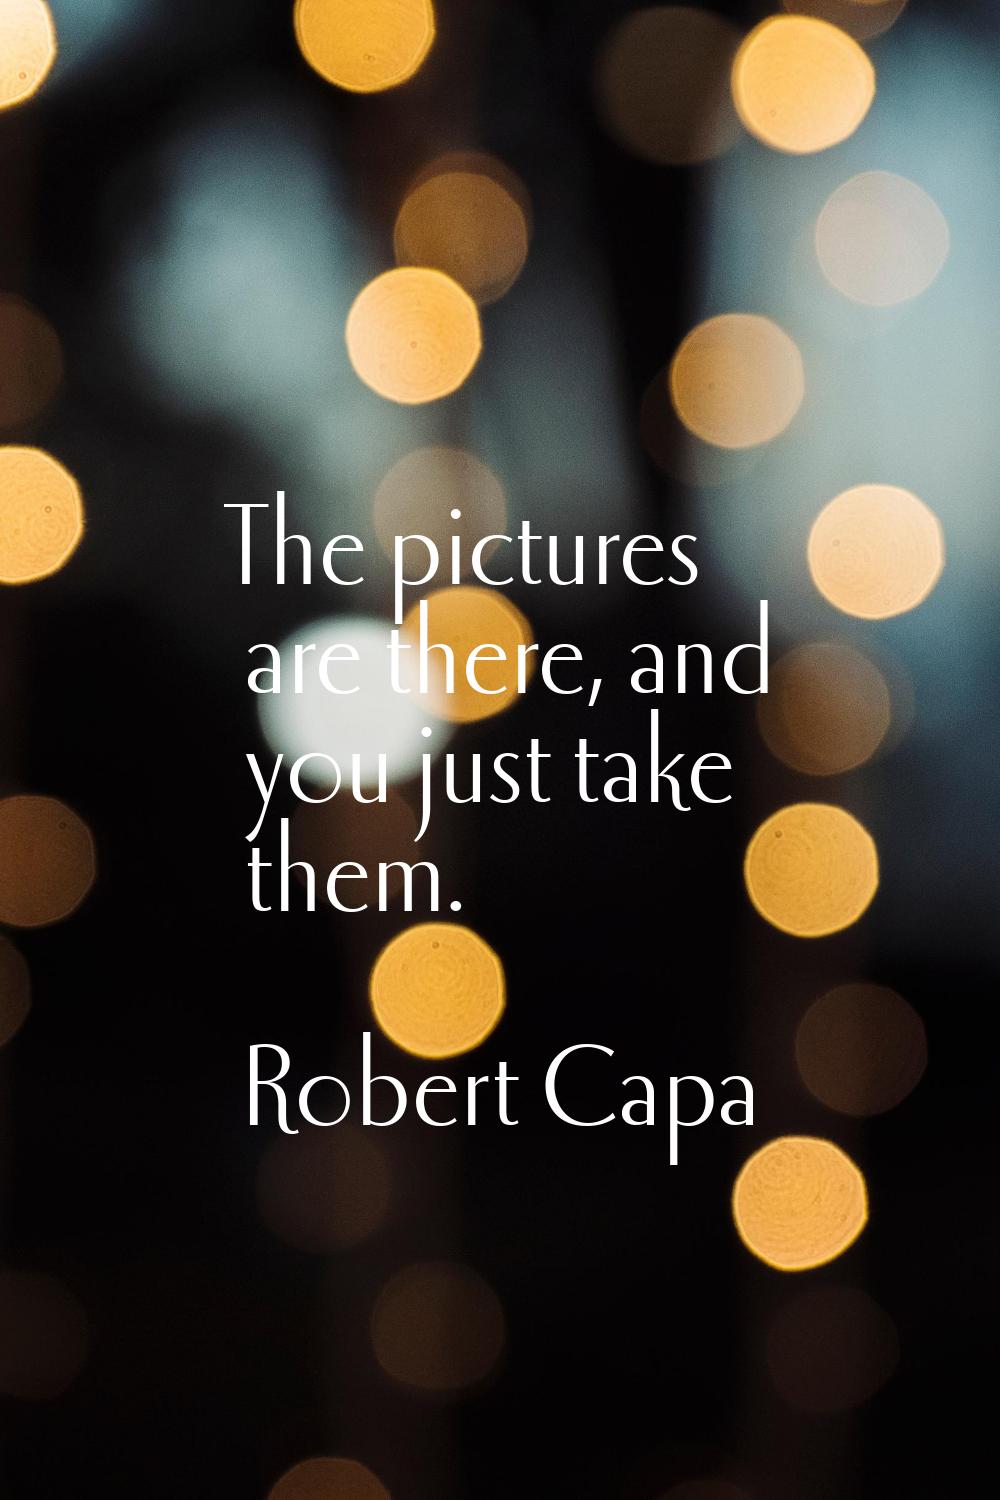 The pictures are there, and you just take them.